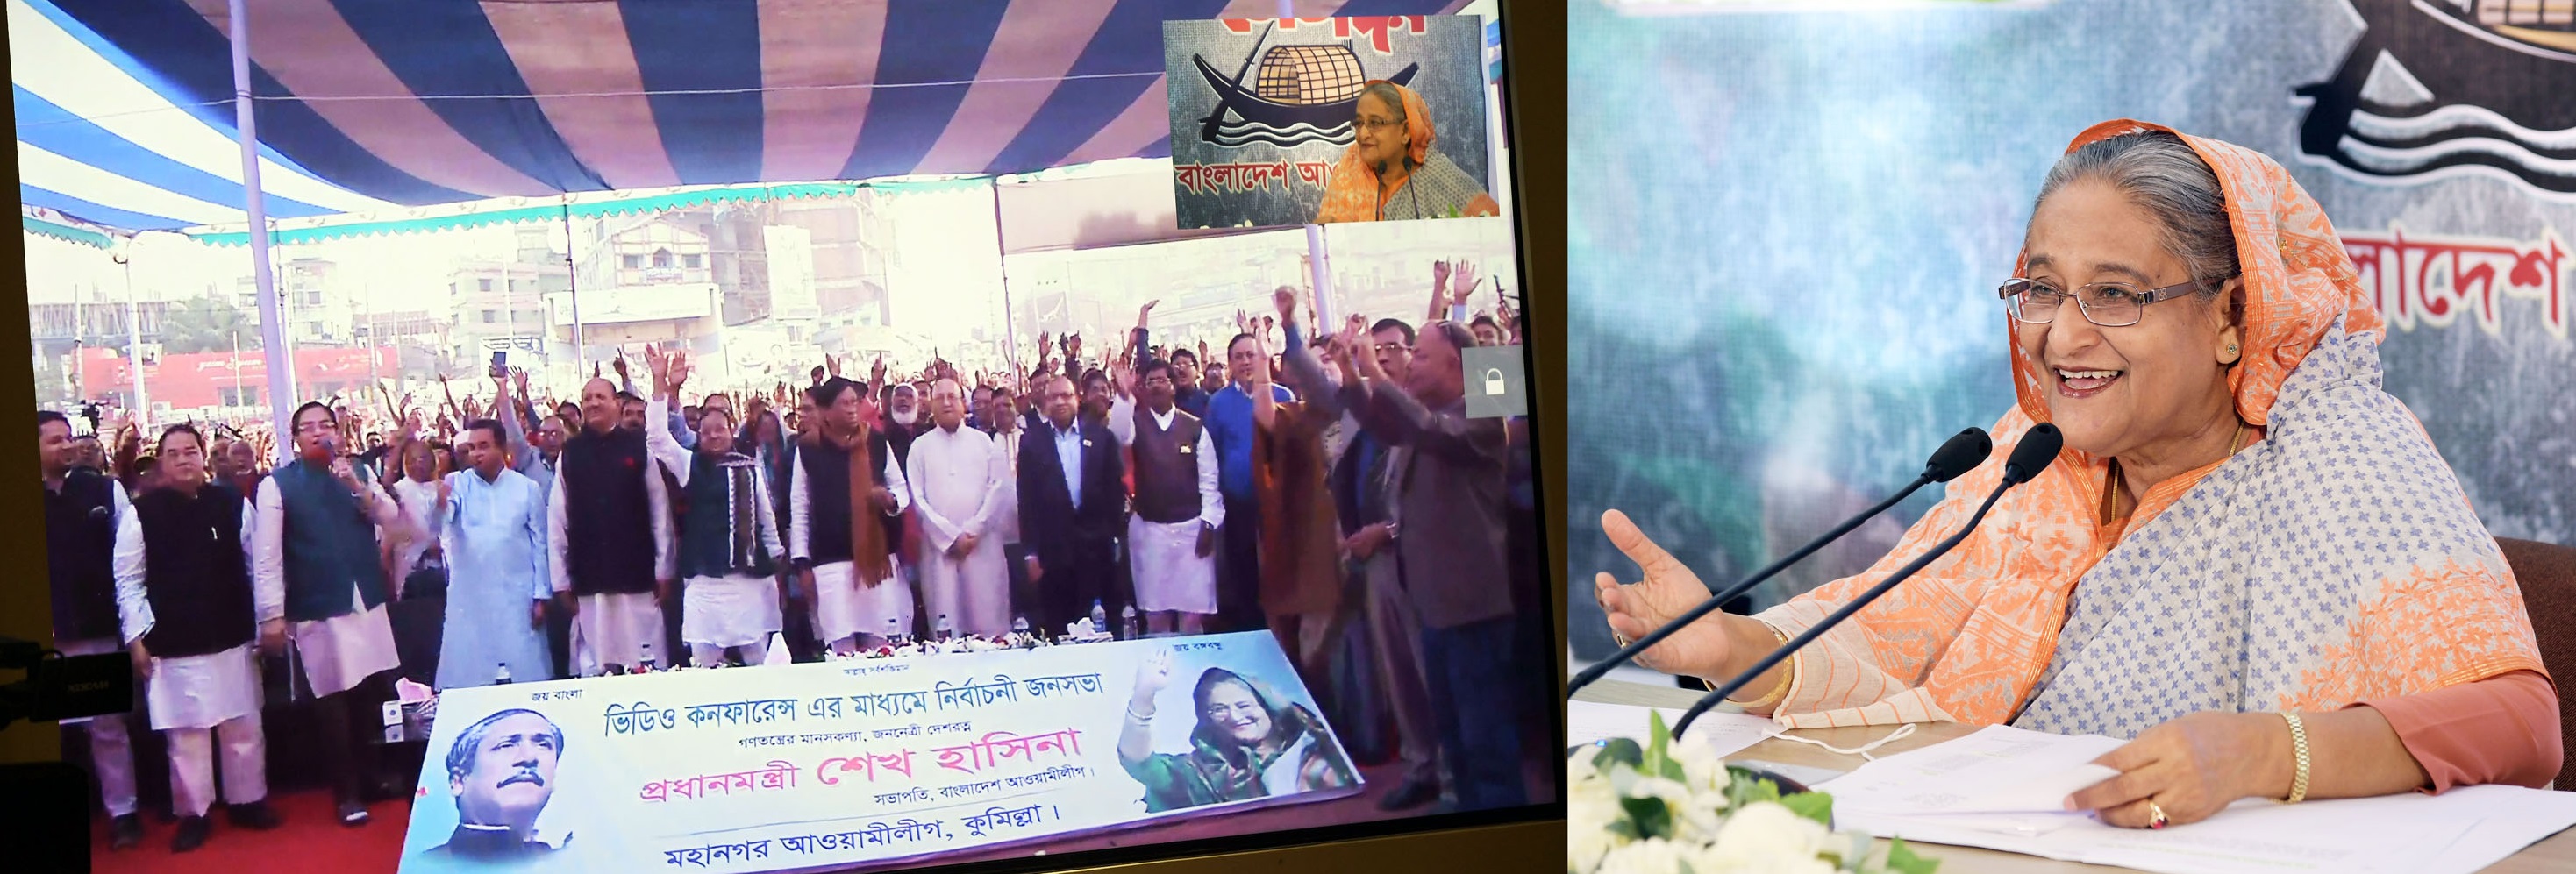 Countrymen have not accepted BNP's terrorism: PM Hasina